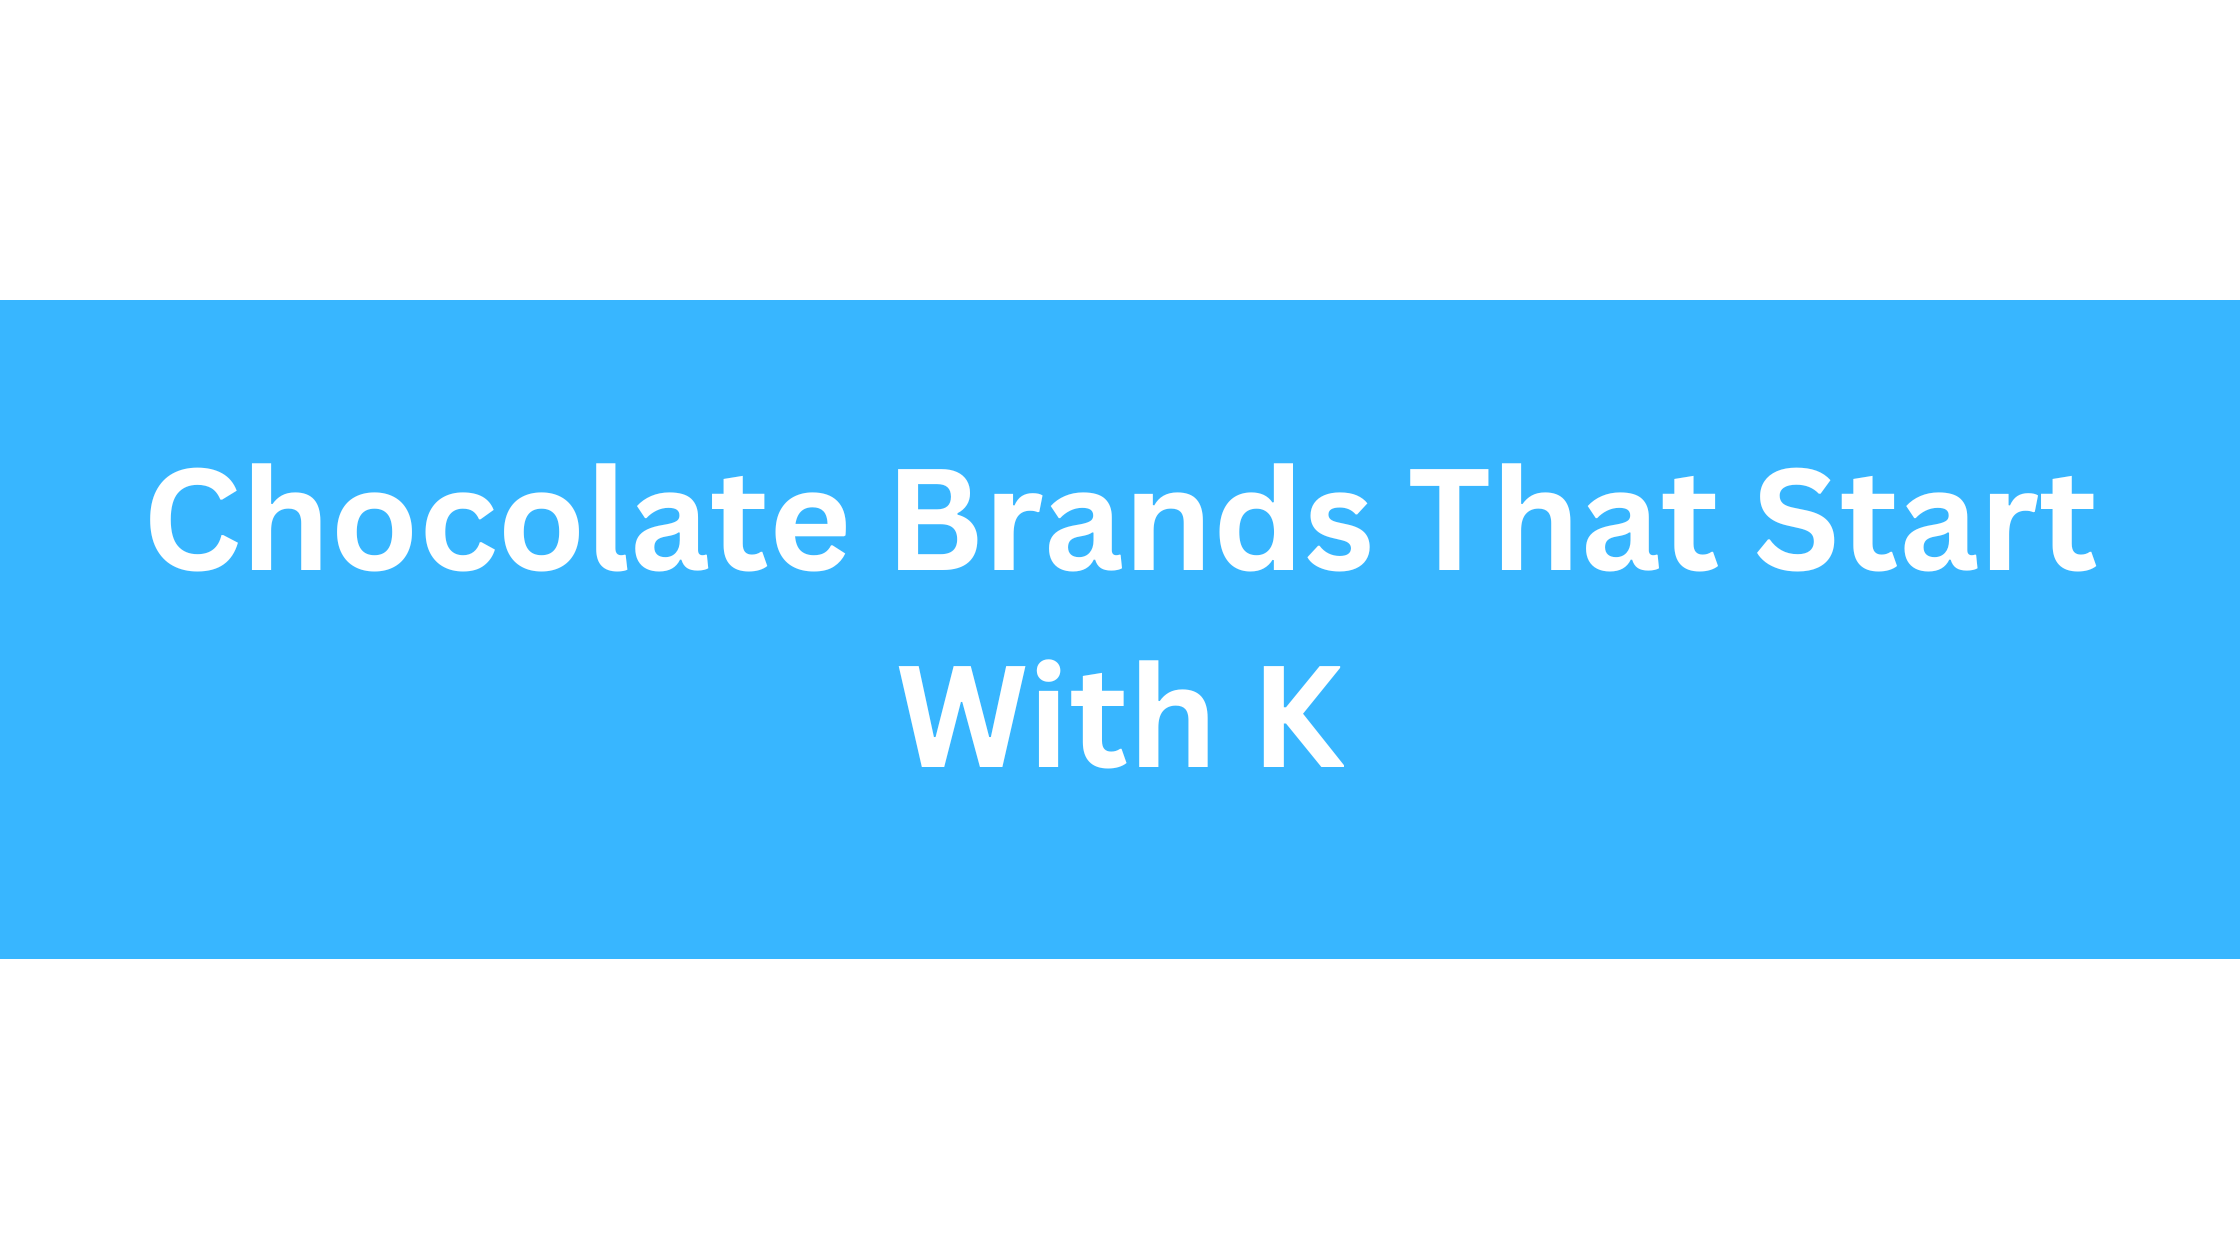 Chocolate Brands That Start With K